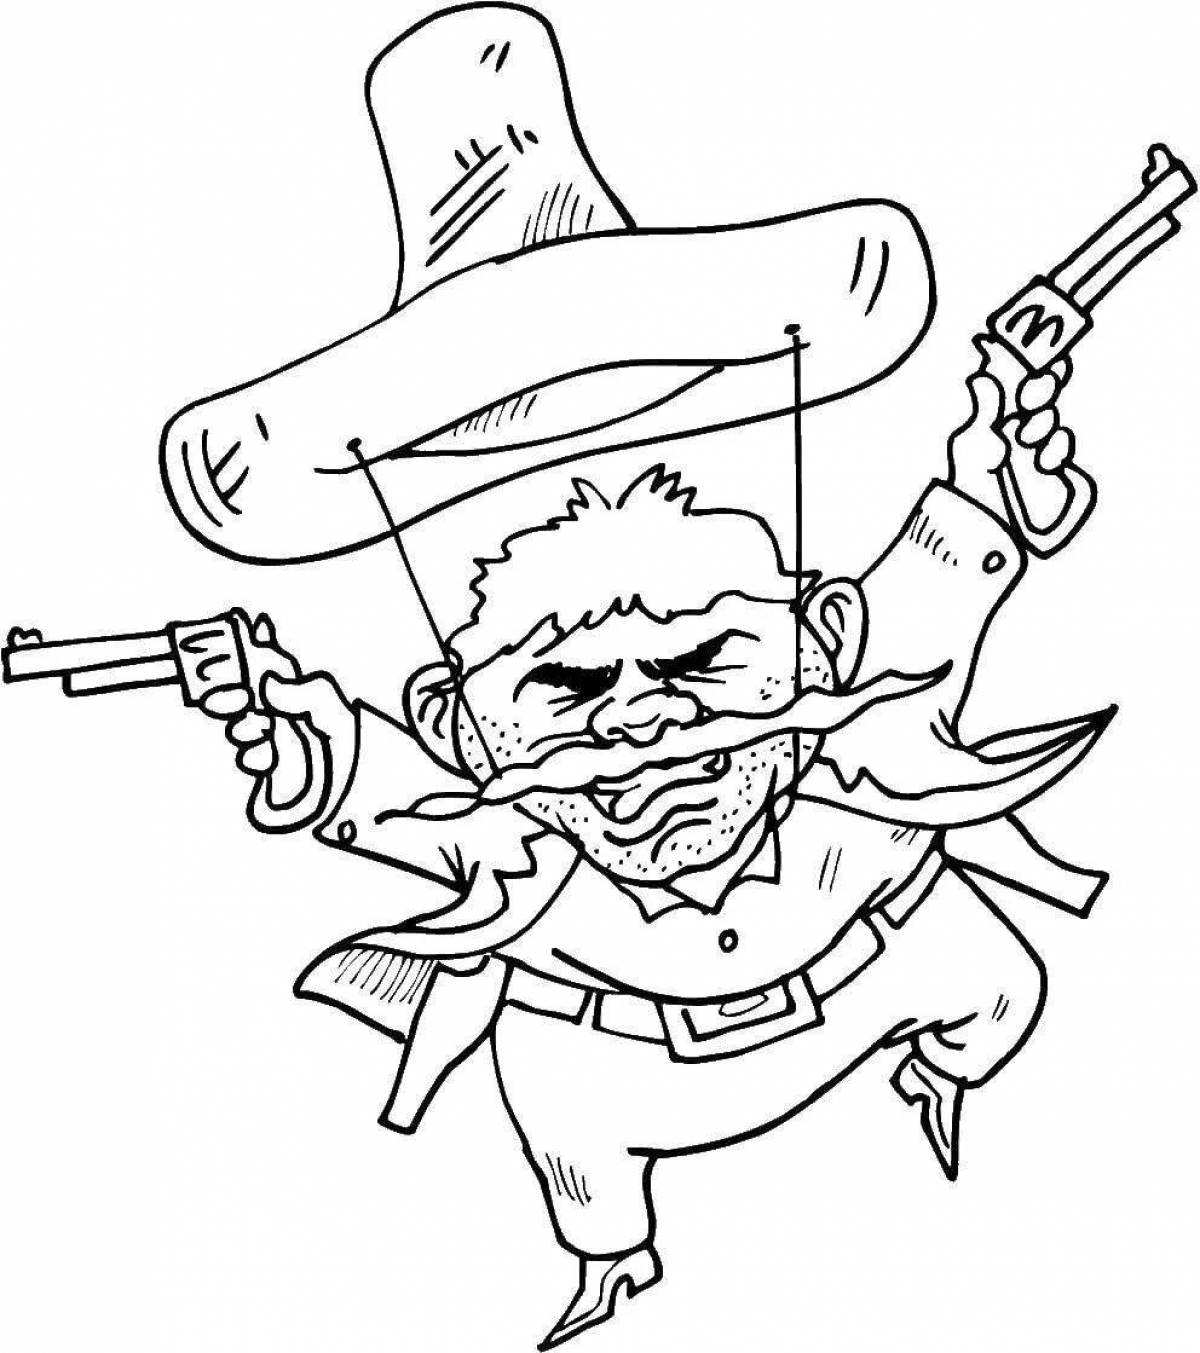 Coloring page robbery - action